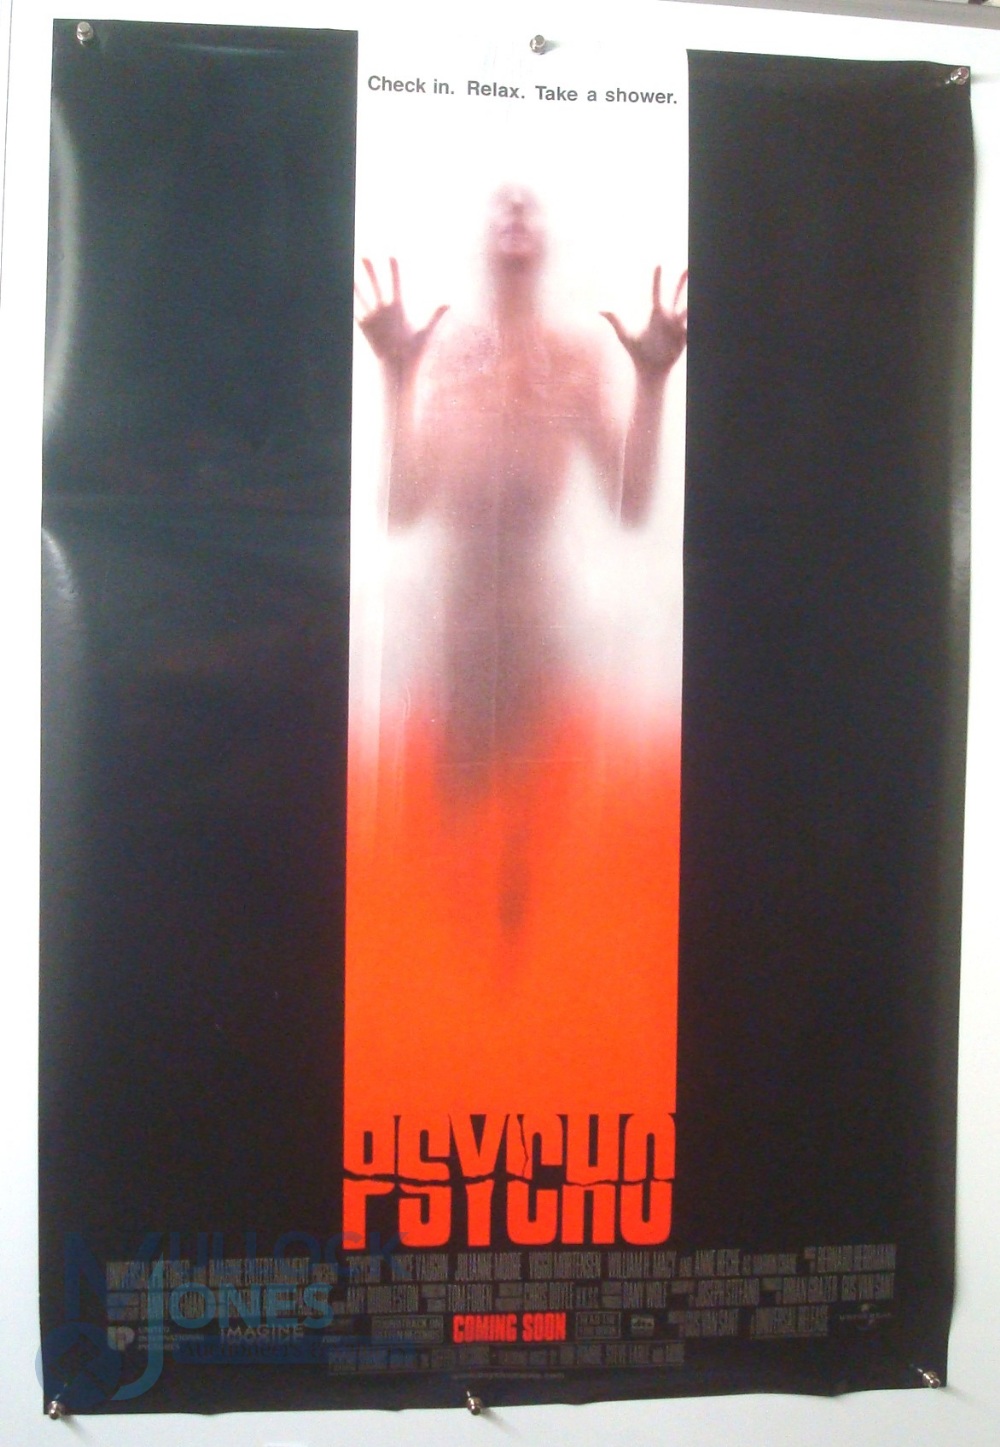 Original Movie/Film Poster - 1998 I Still Know What You Did Last Summer, Psycho - 40x30" approx. - Image 2 of 2